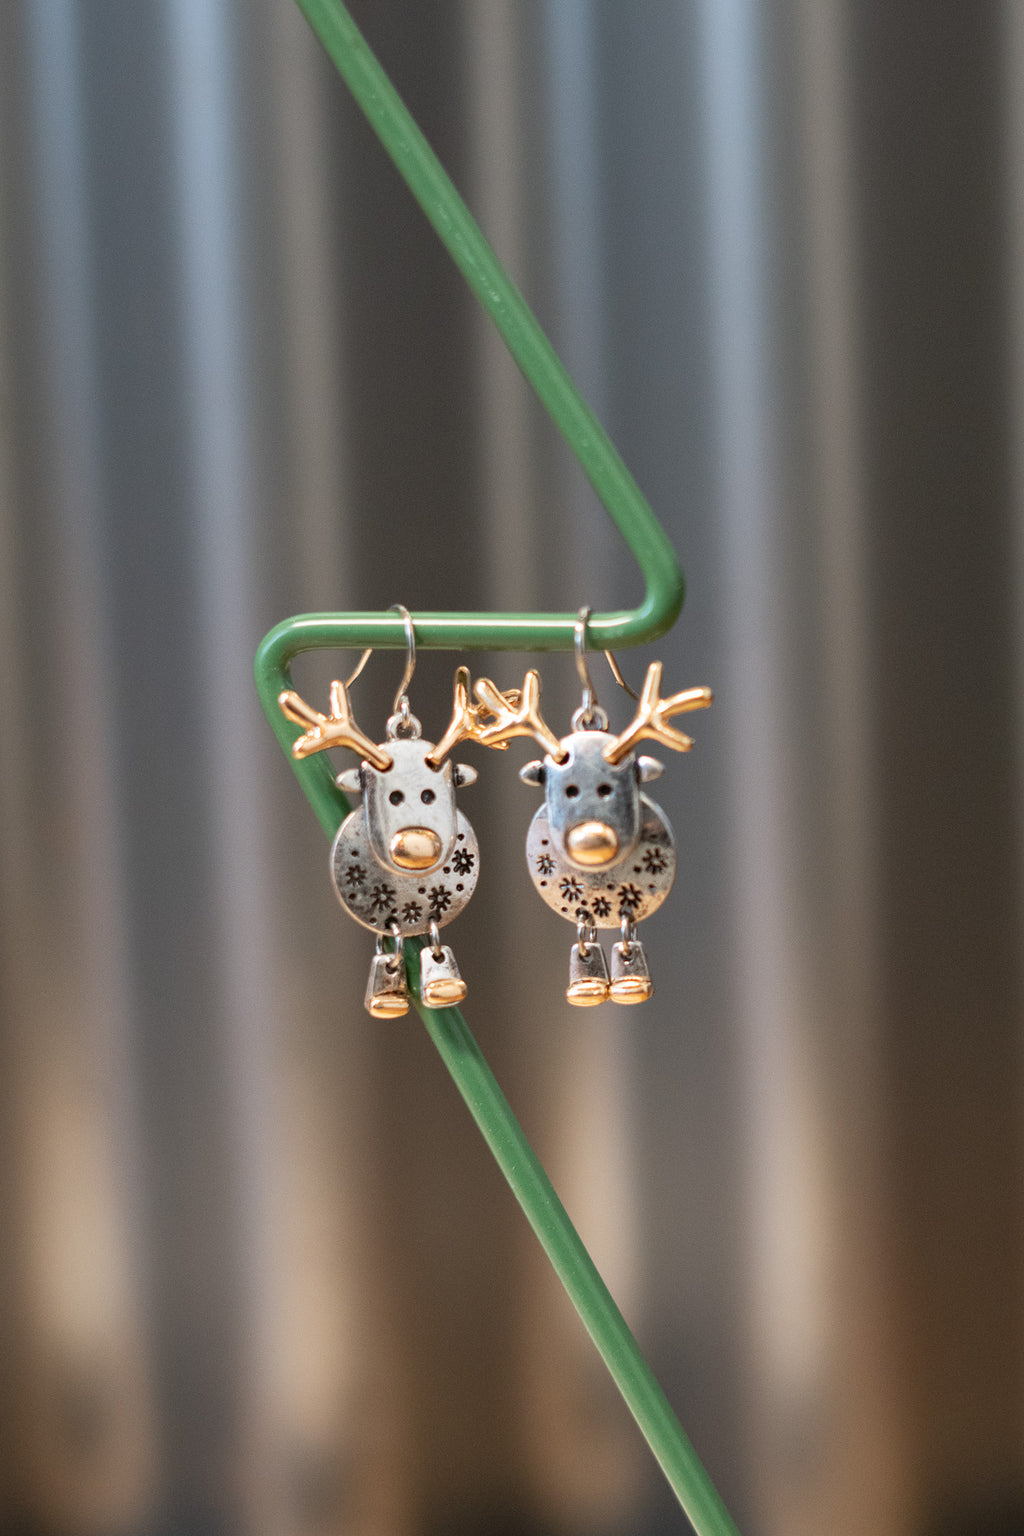 Run Run Rudolph Earrings with Gold Accents